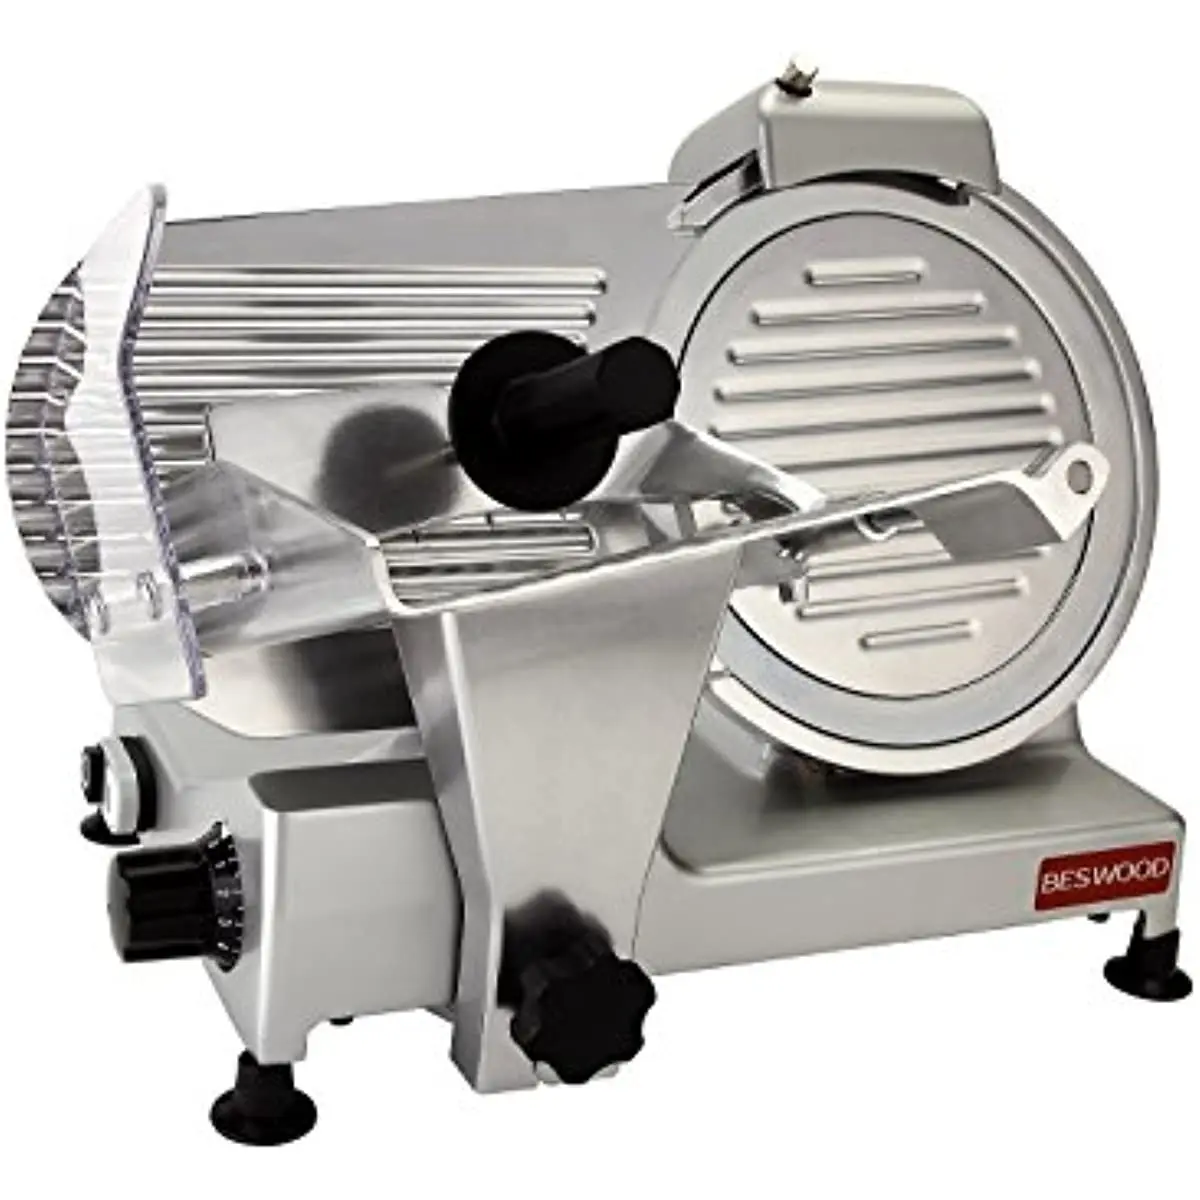 

BESWOOD 10" Premium Chromium-plated Steel Blade Electric Deli Meat Cheese Food Slicer Commercial and for Home use 240W